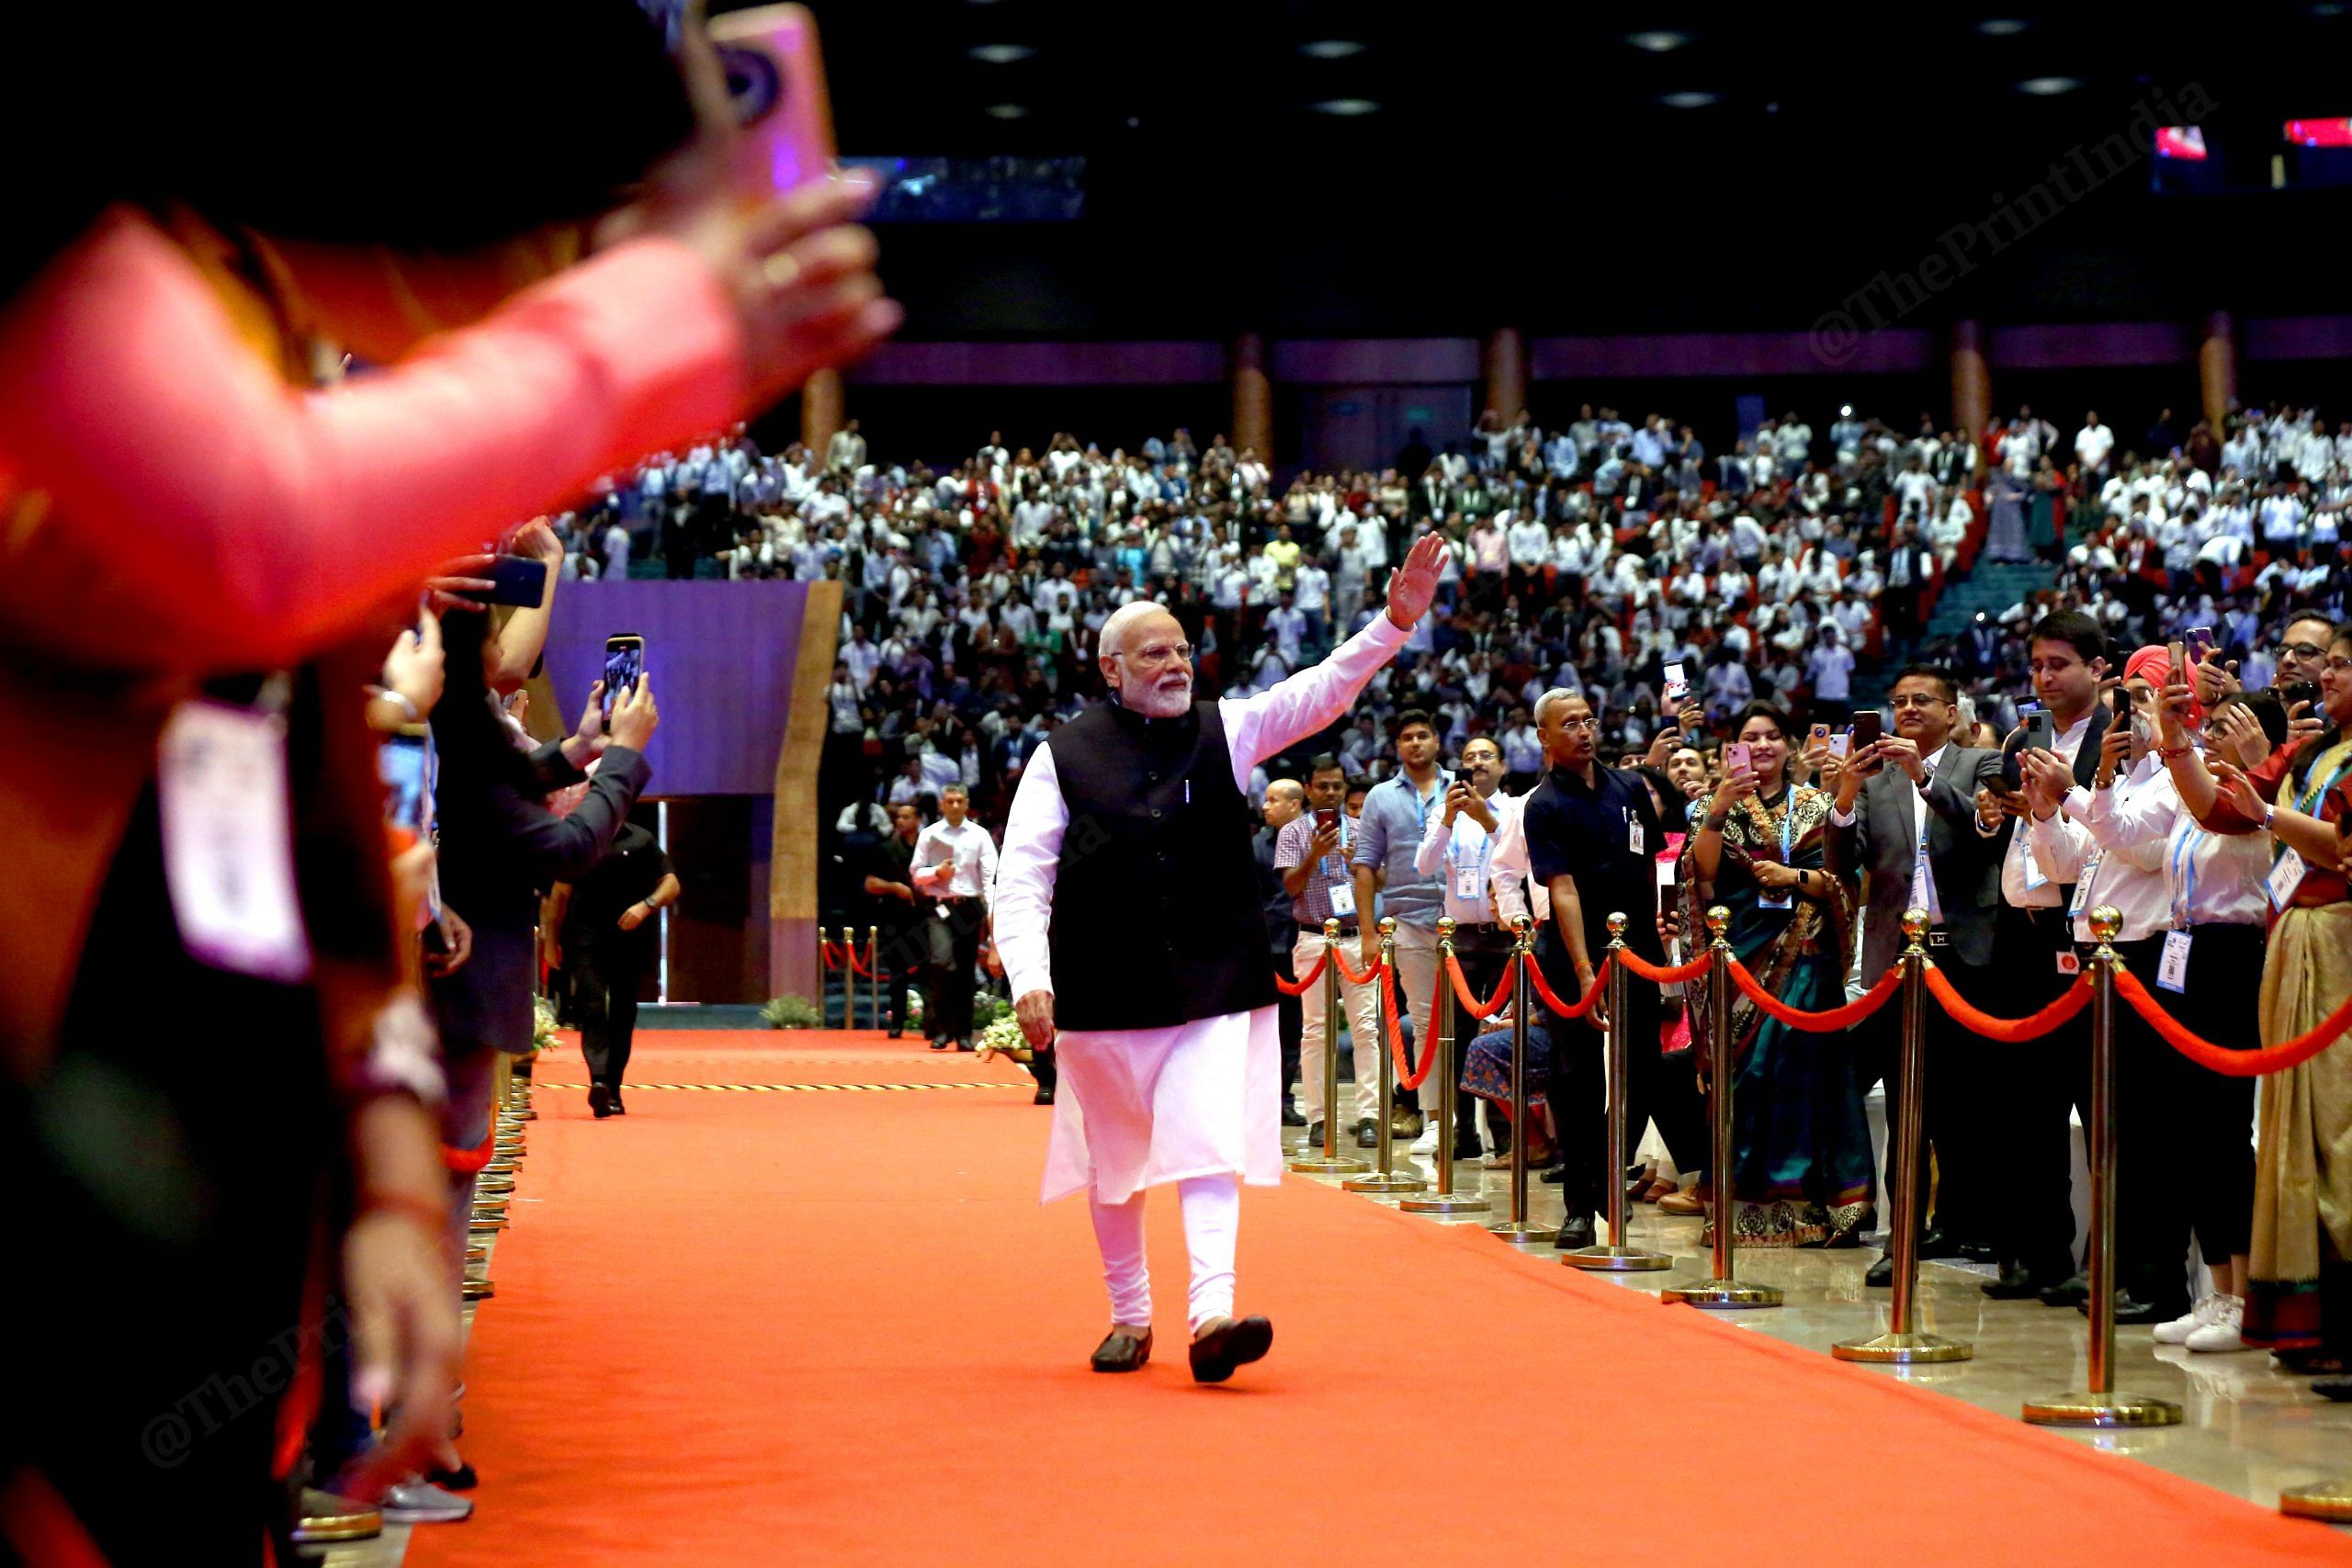 Prime Minister Narendra Modi inaugurates the 7th India Mobile Congress at Bharat Mandapam, Pragati Maidan in October. The striking thing for me here is that the PM can seen walking the red carpet, waving to the crowd, without the security cordon that usually surrounds him | Photo: Suraj Singh Bisht | ThePrint